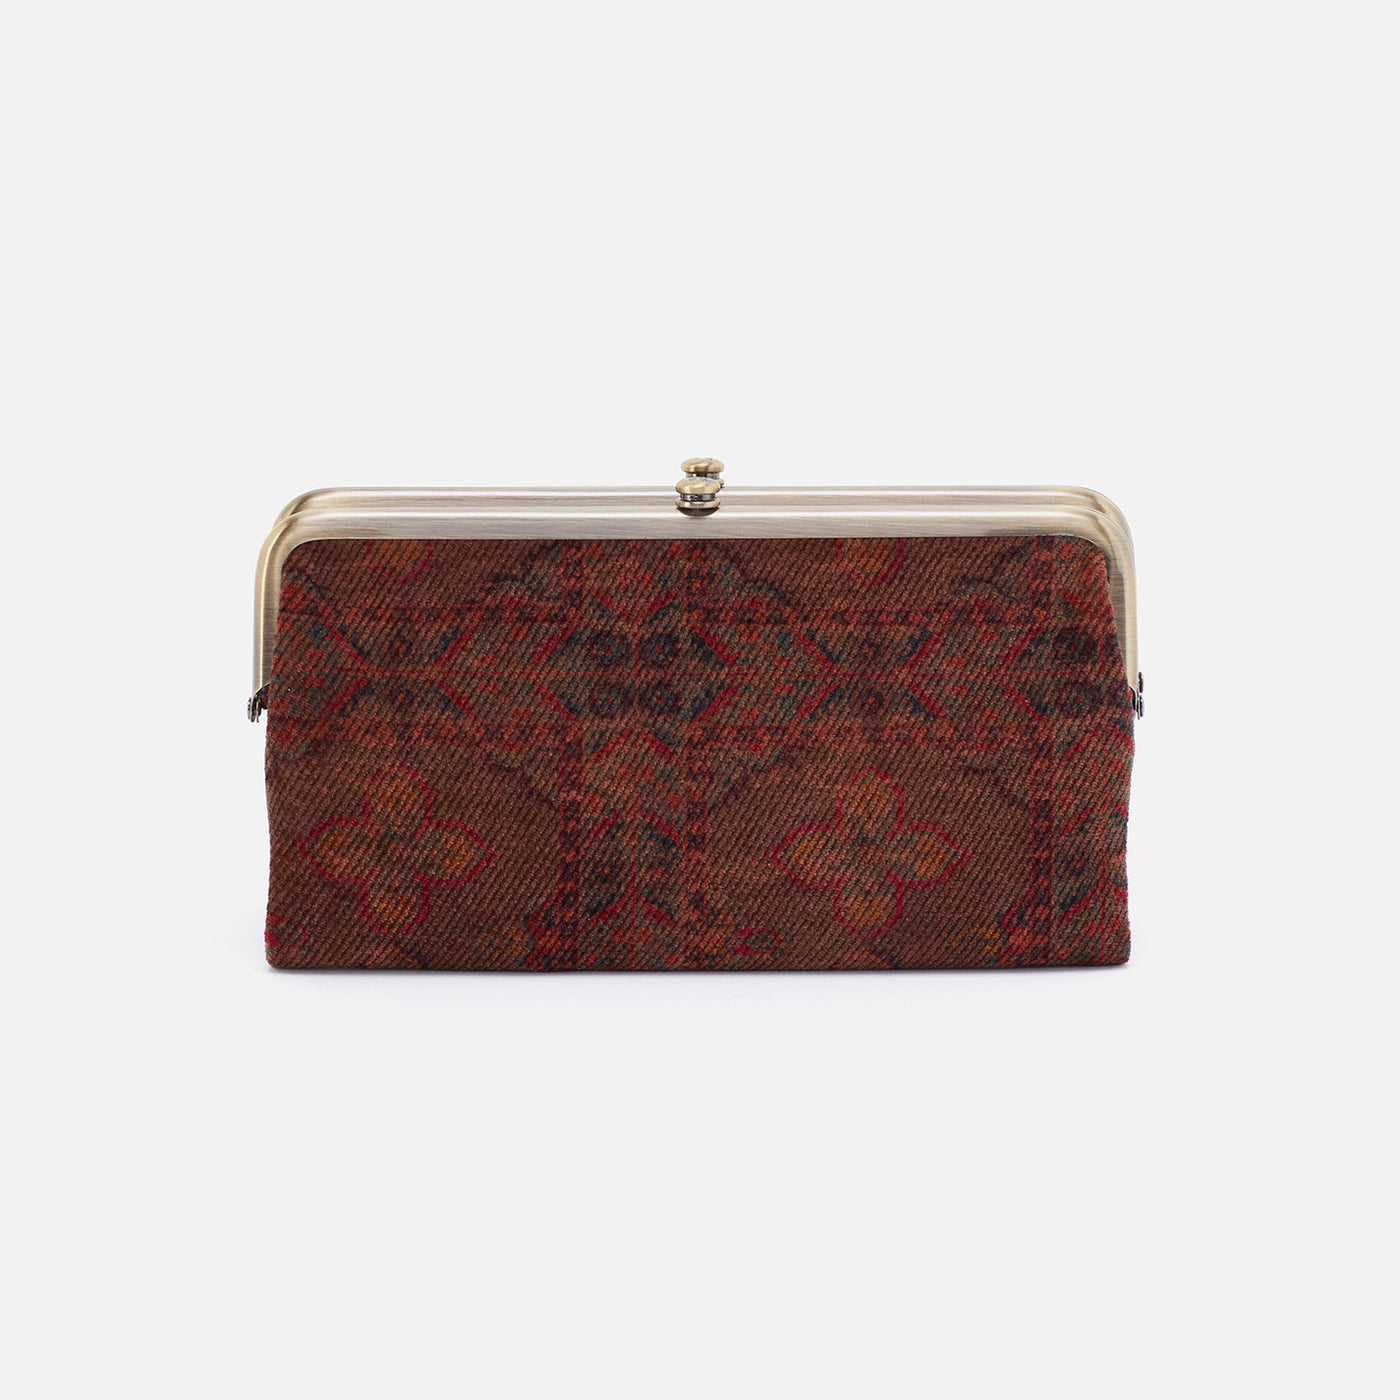 Lauren Clutch-Wallet in Tapestry Fabric With Leather Trim - Arabesque